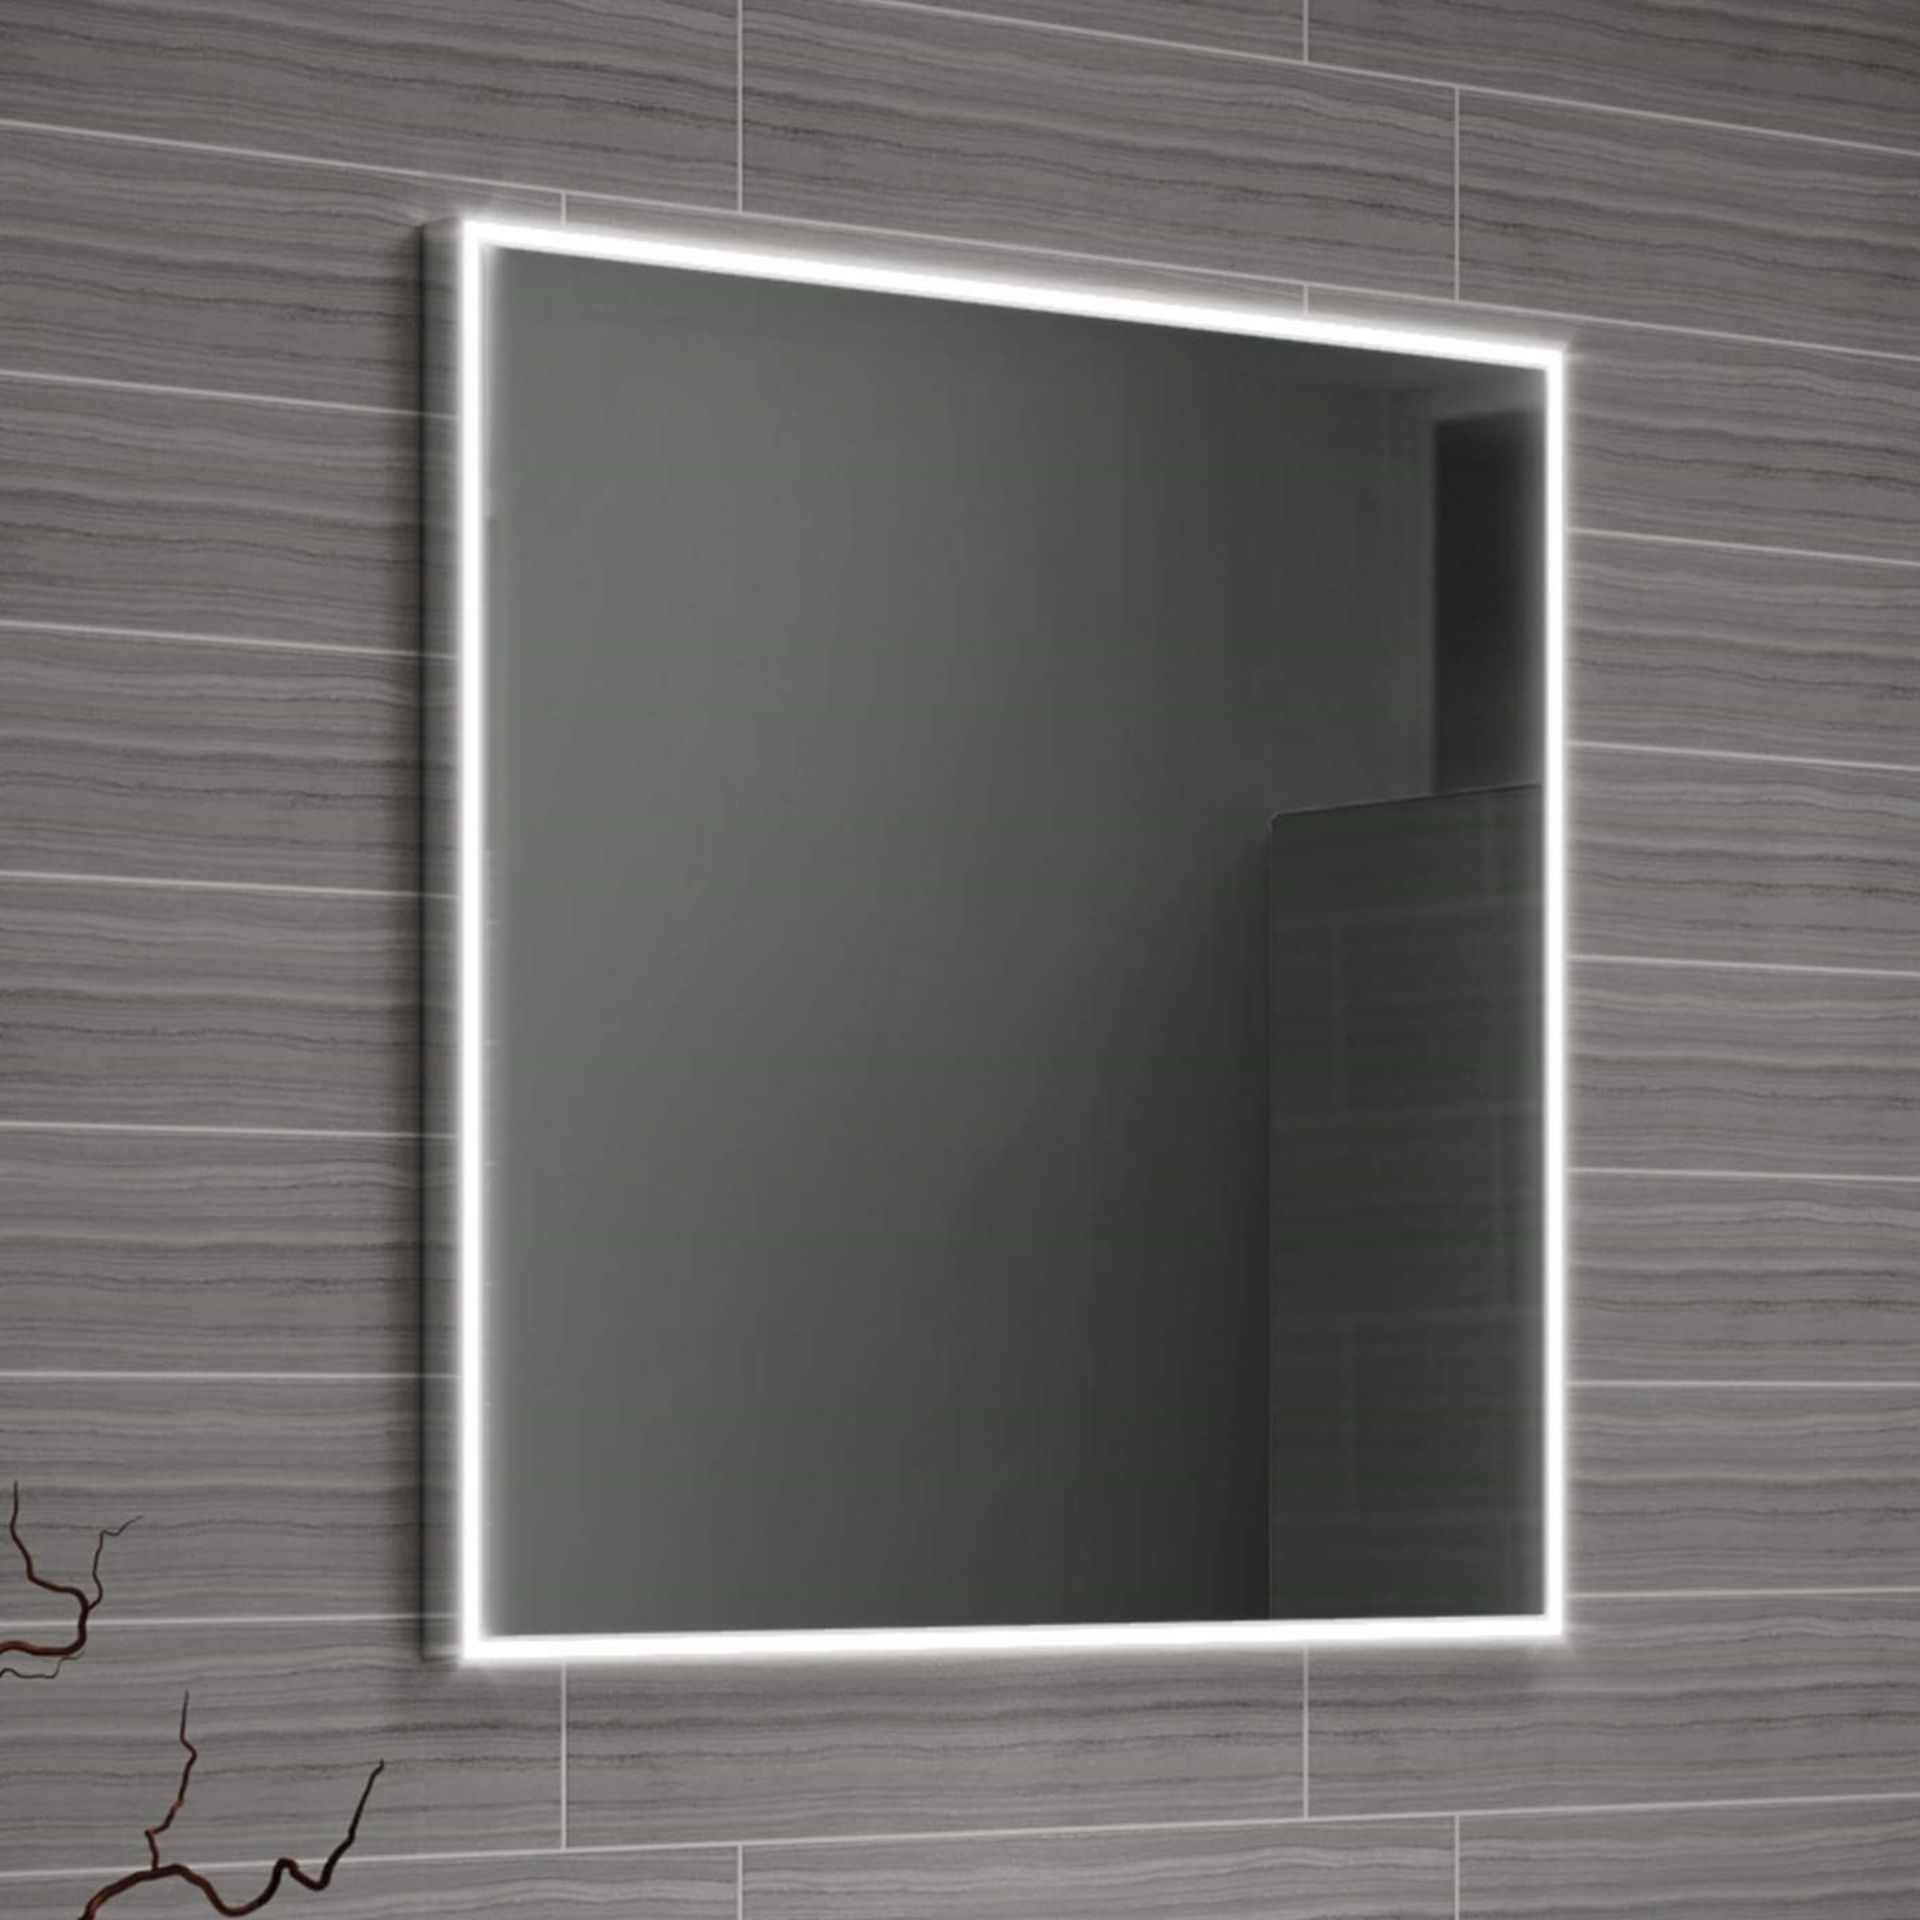 (VD16) 600x600mm Cosmic LED Mirror. RRP £399.99.ML4005, We love this mirror as it provides a w... - Image 4 of 4